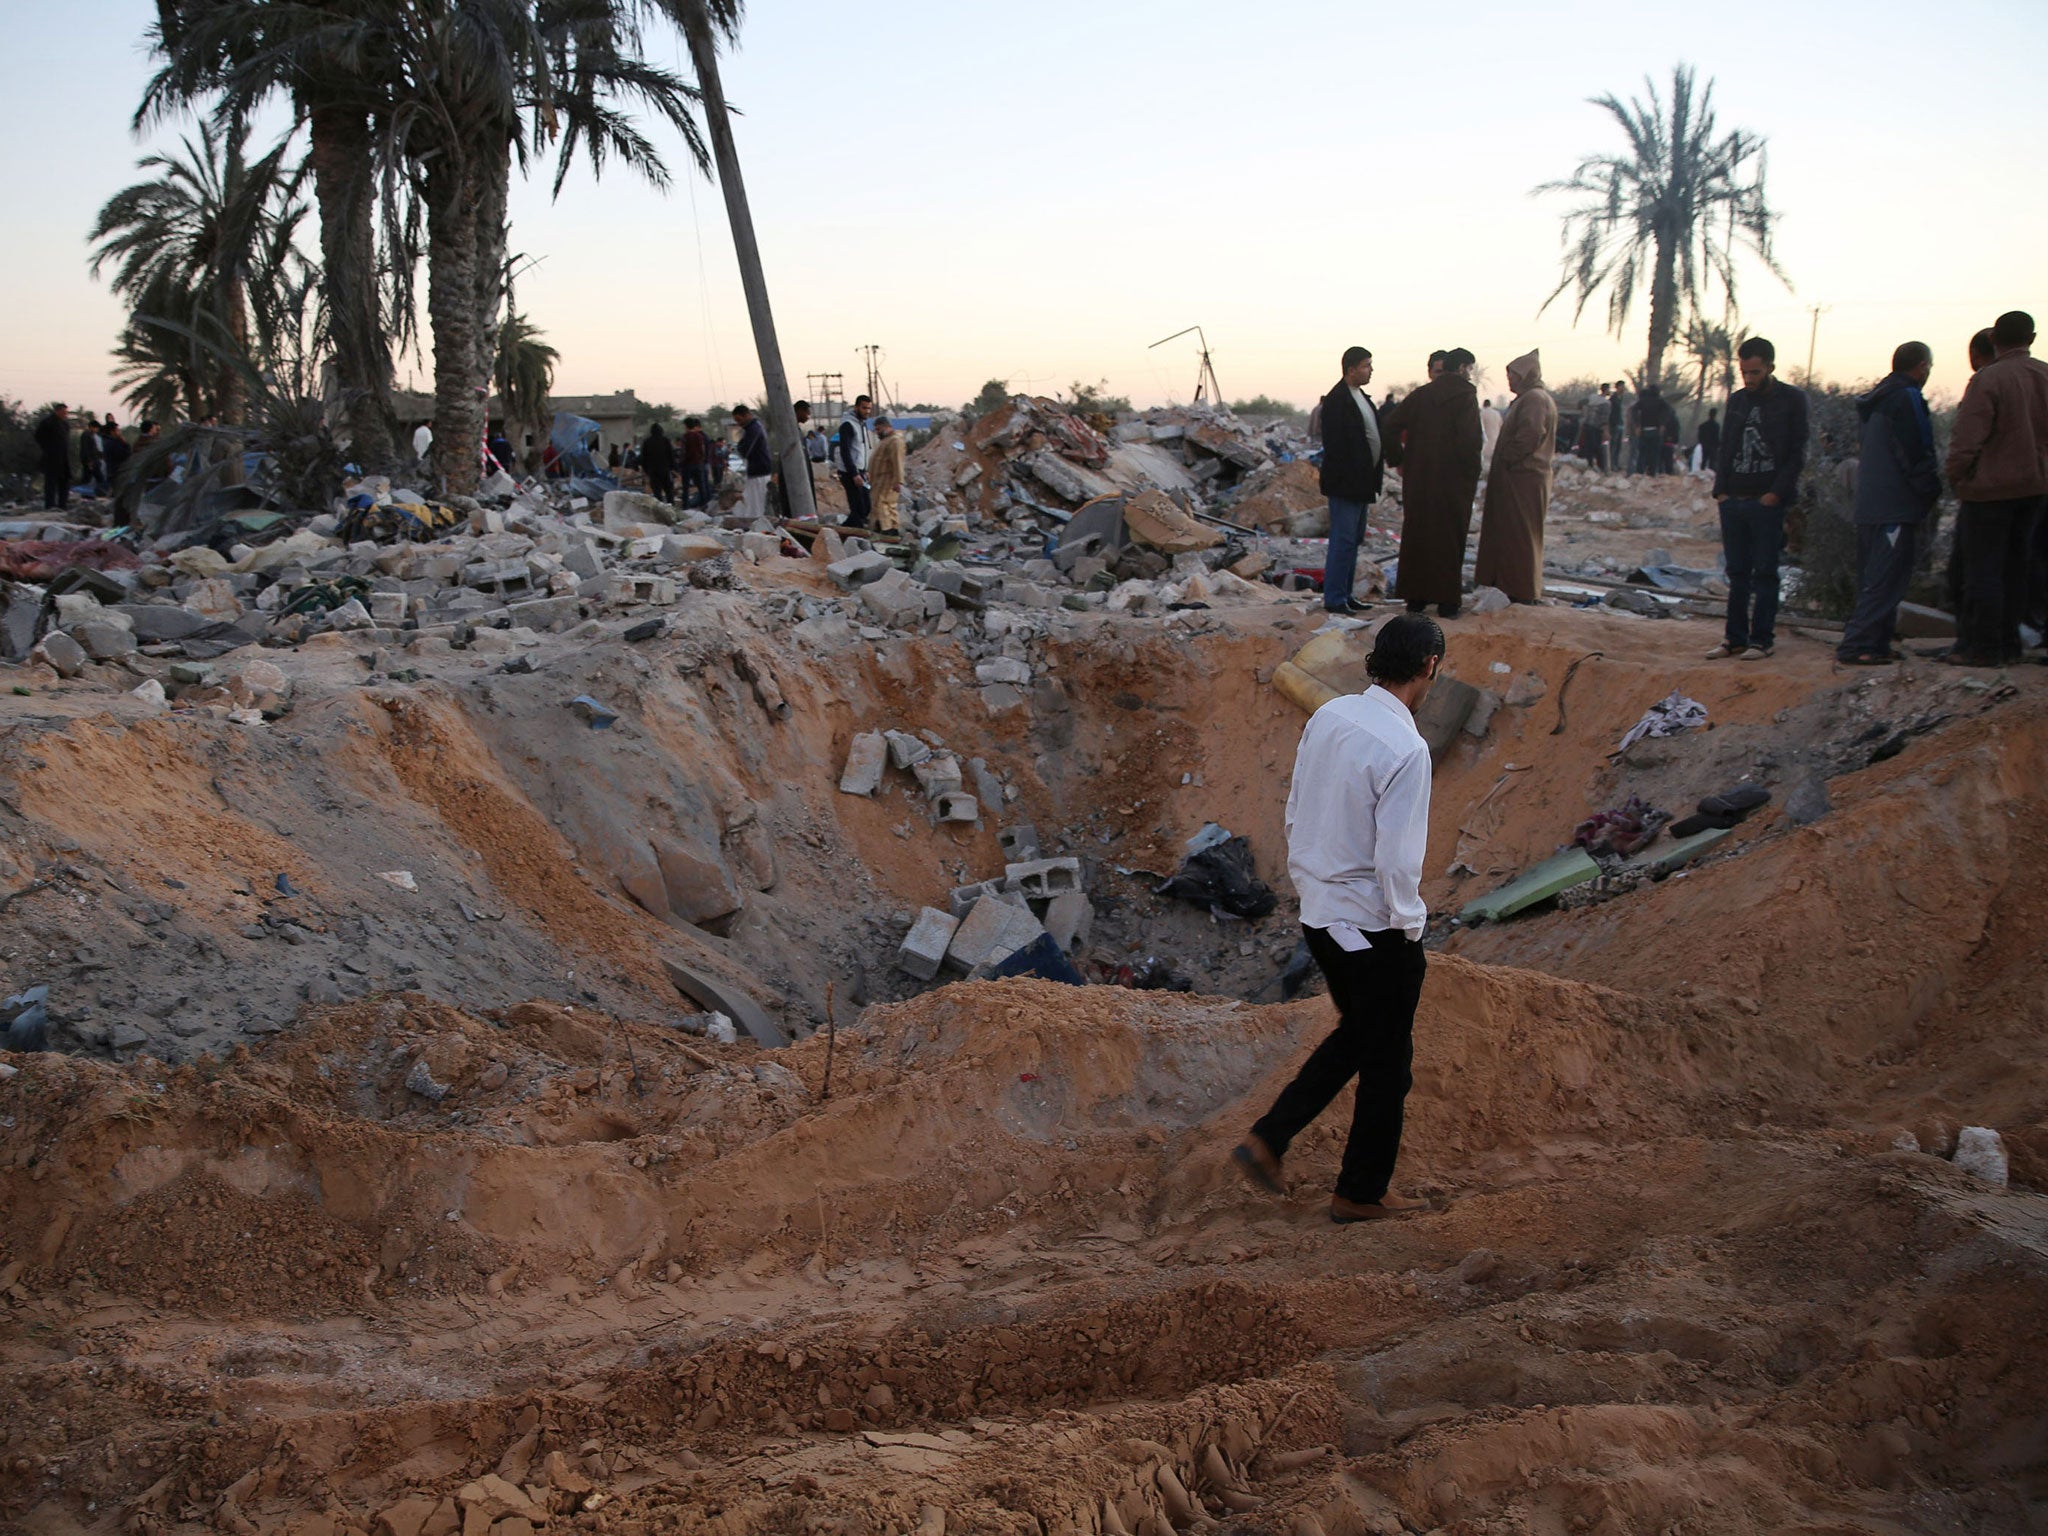 People gather after an air strike on a house and training camp belonging to the Islamic State group, west of Sabratha, Libya, on 19 February 2016